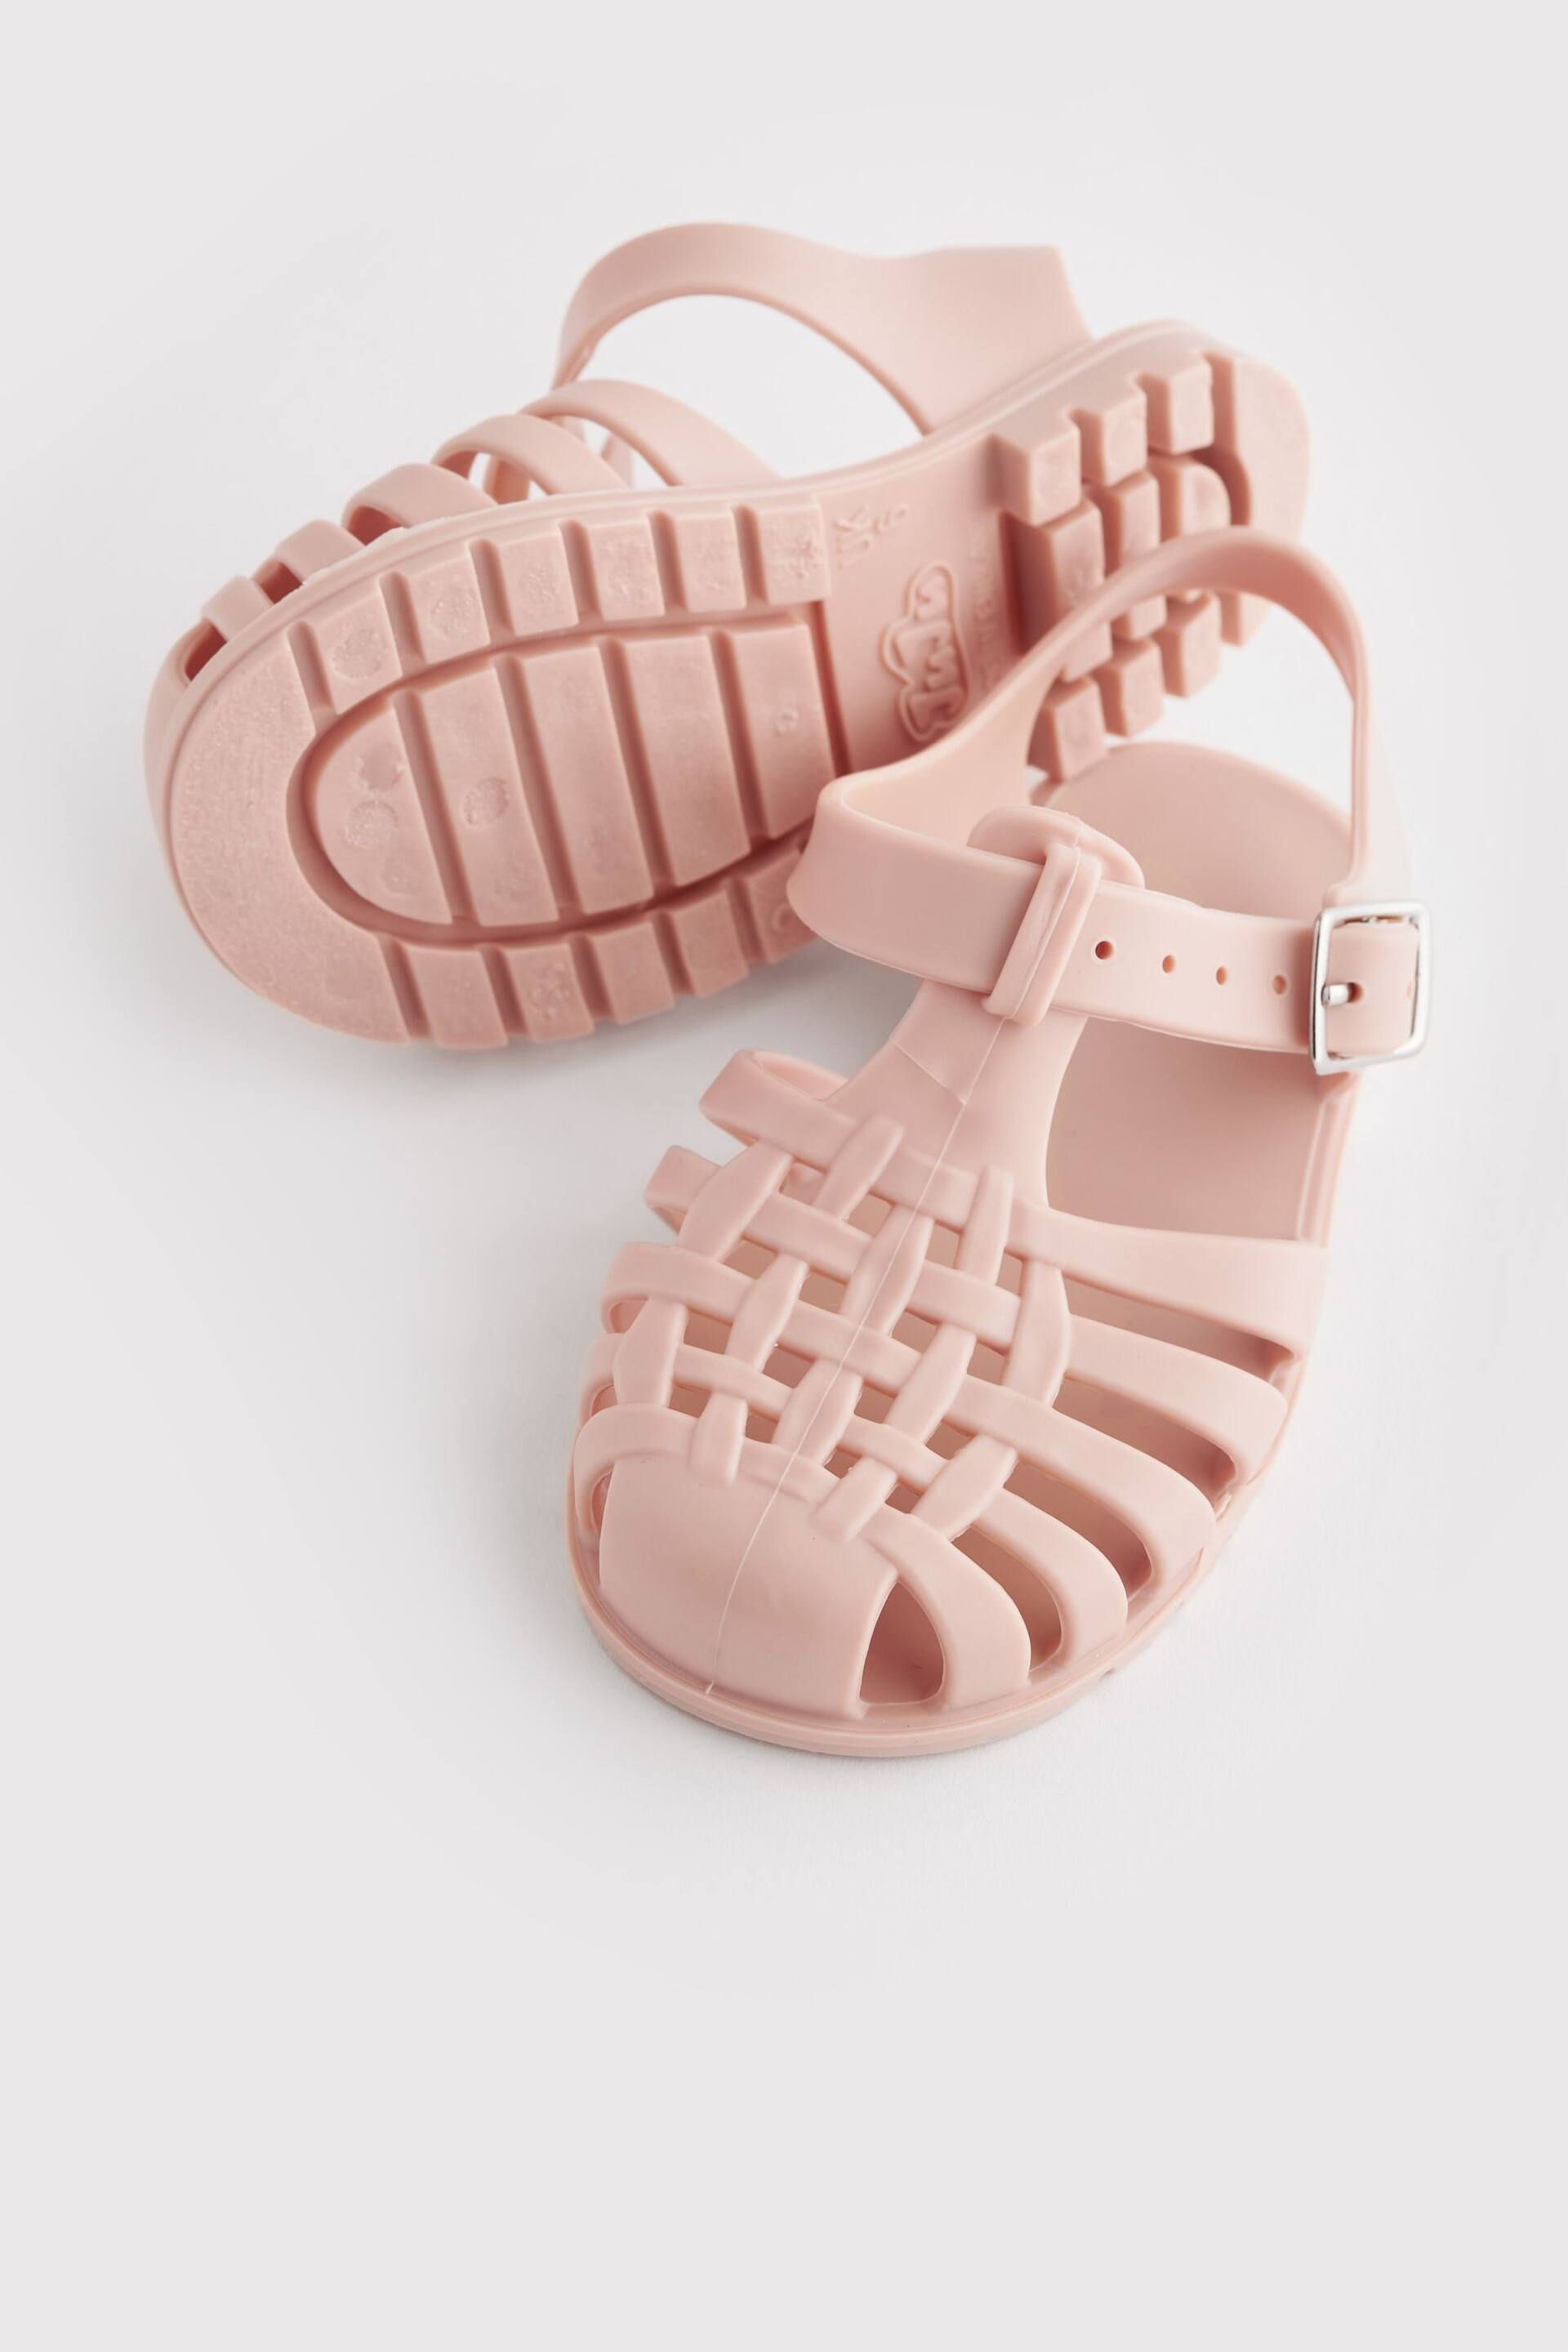 Pink Jelly Fisherman Sandals - Image 3 of 5